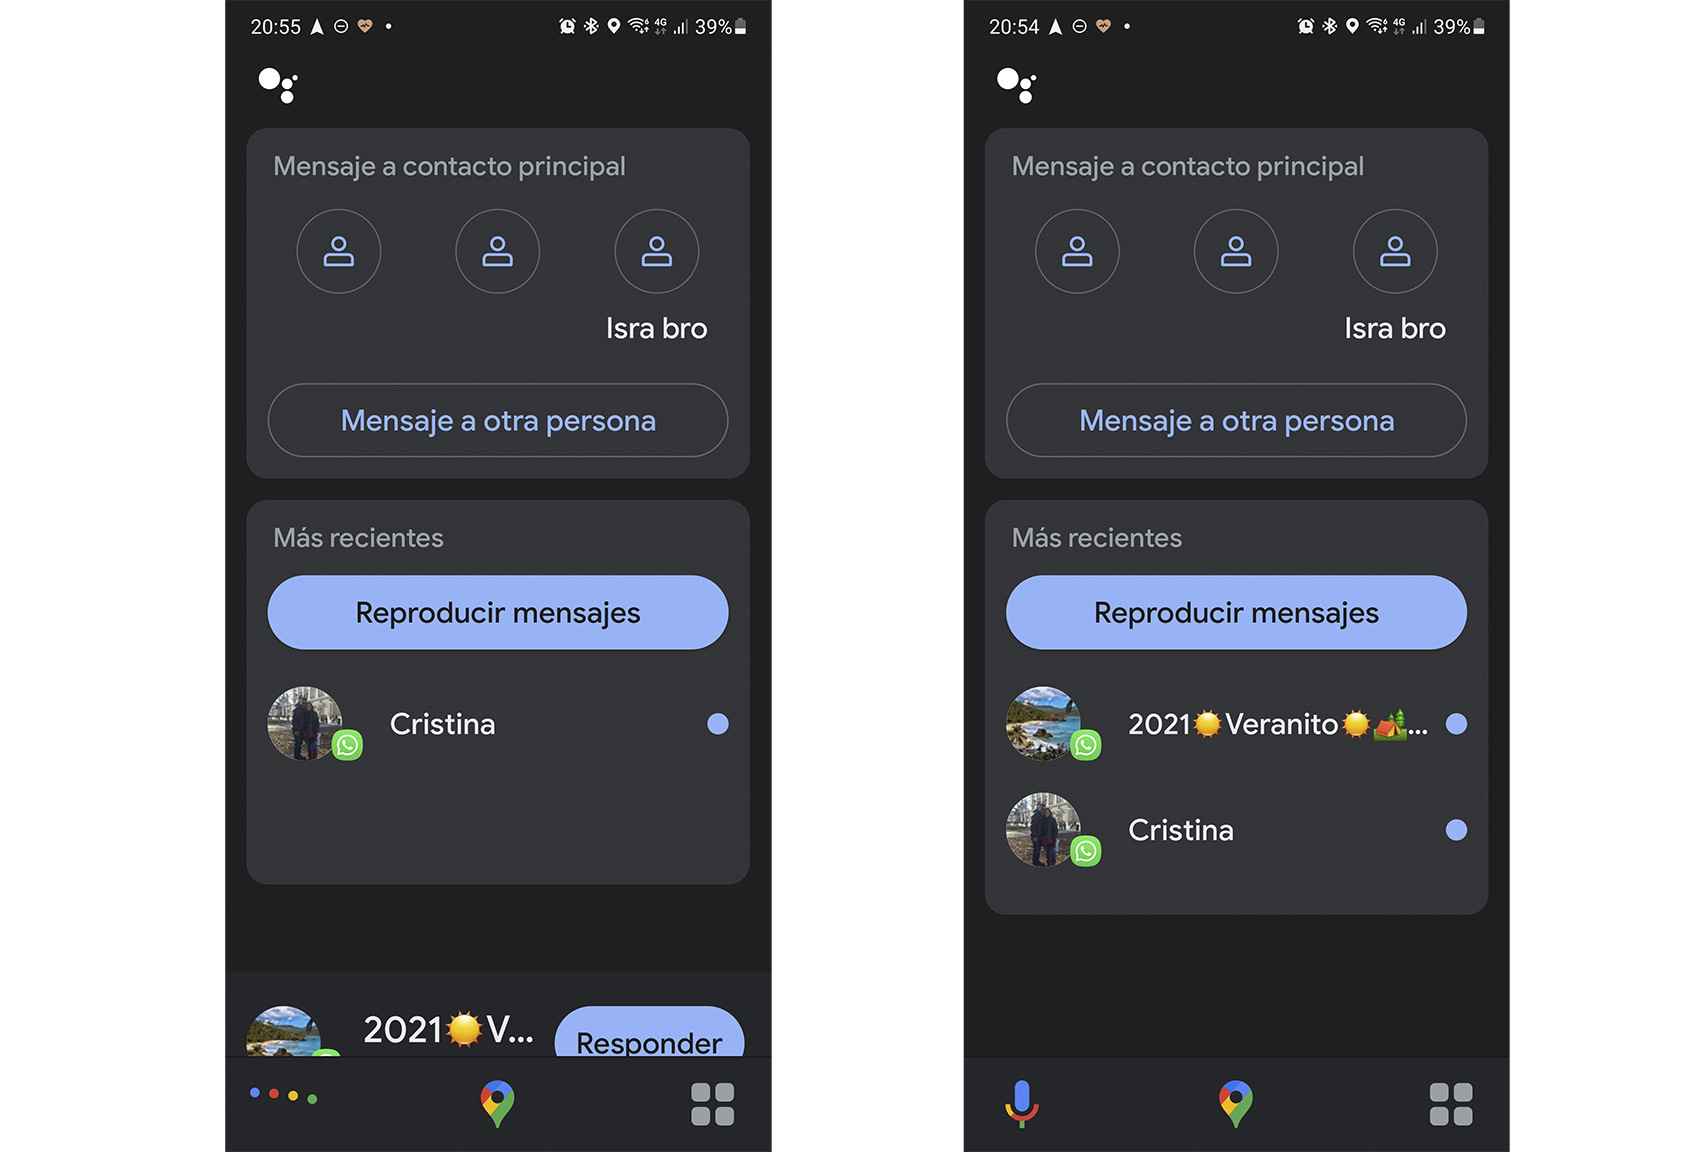 Reply to WhatsApp messages with Google Assistant